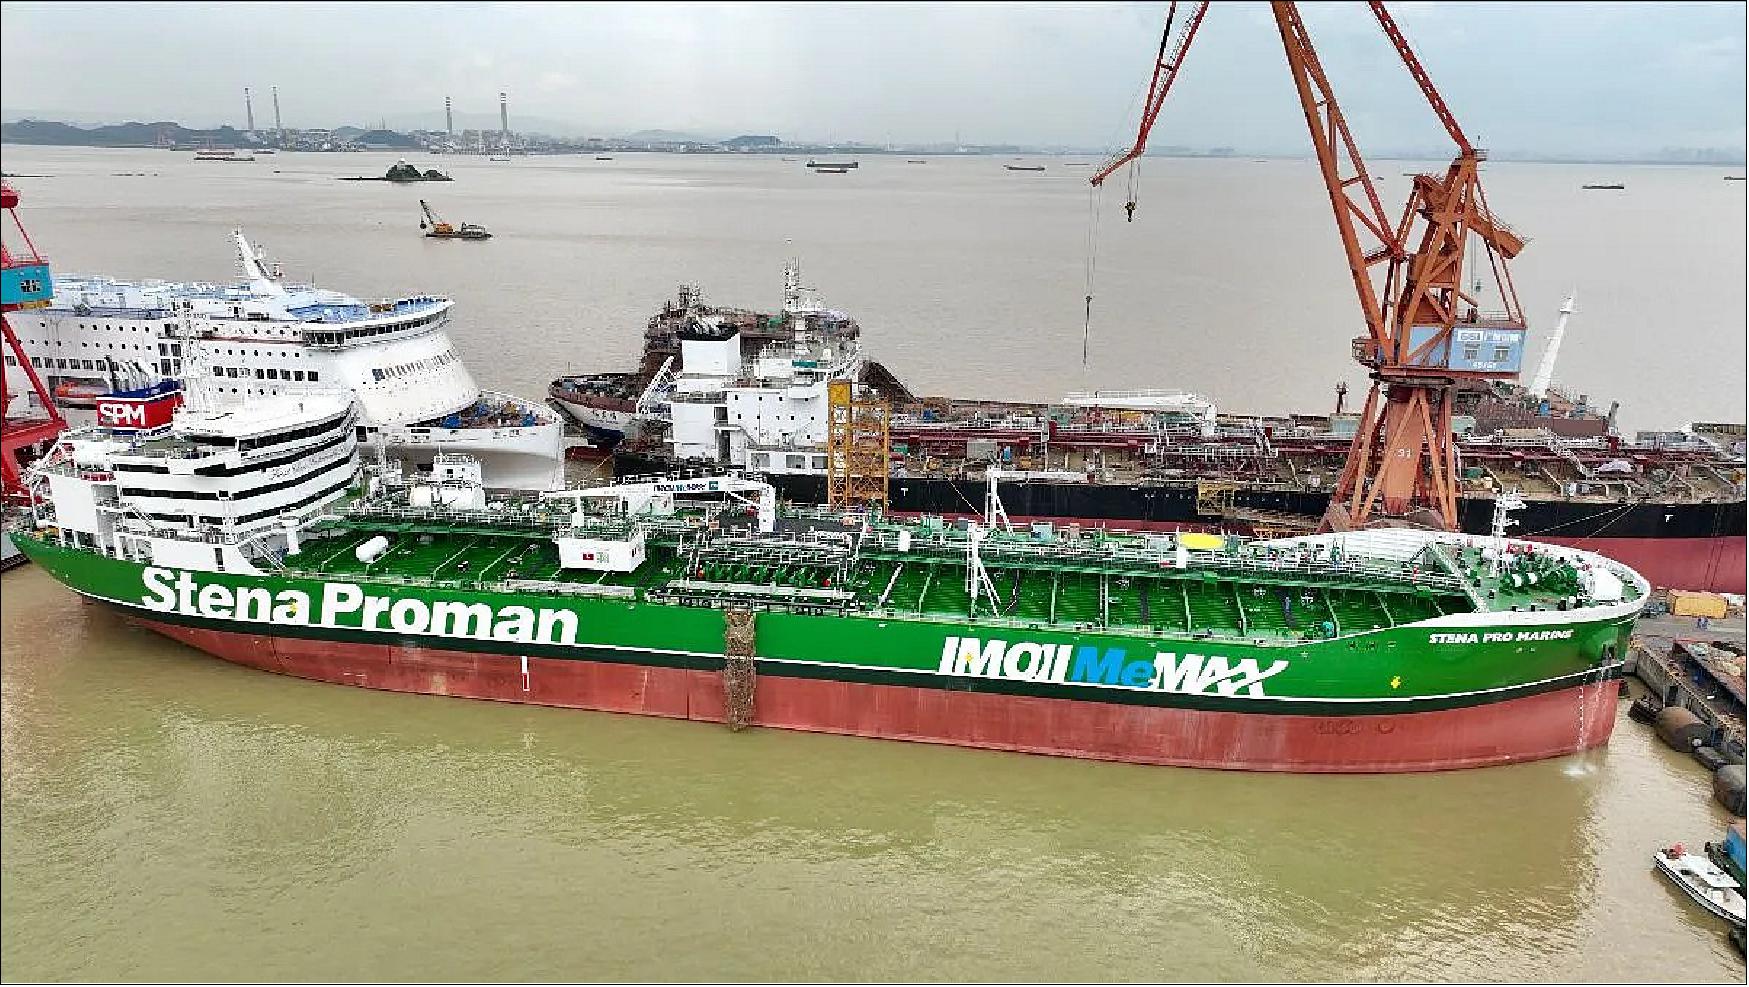 Figure 9: Proman Stena Bulk, a joint venture between methanol producer Proman and tanker shipping company Stena Bulk, has today announced that its second methanol-powered newbuild tanker, Stena Pro Marine, has been delivered (image credit: Stena Pro Marine)